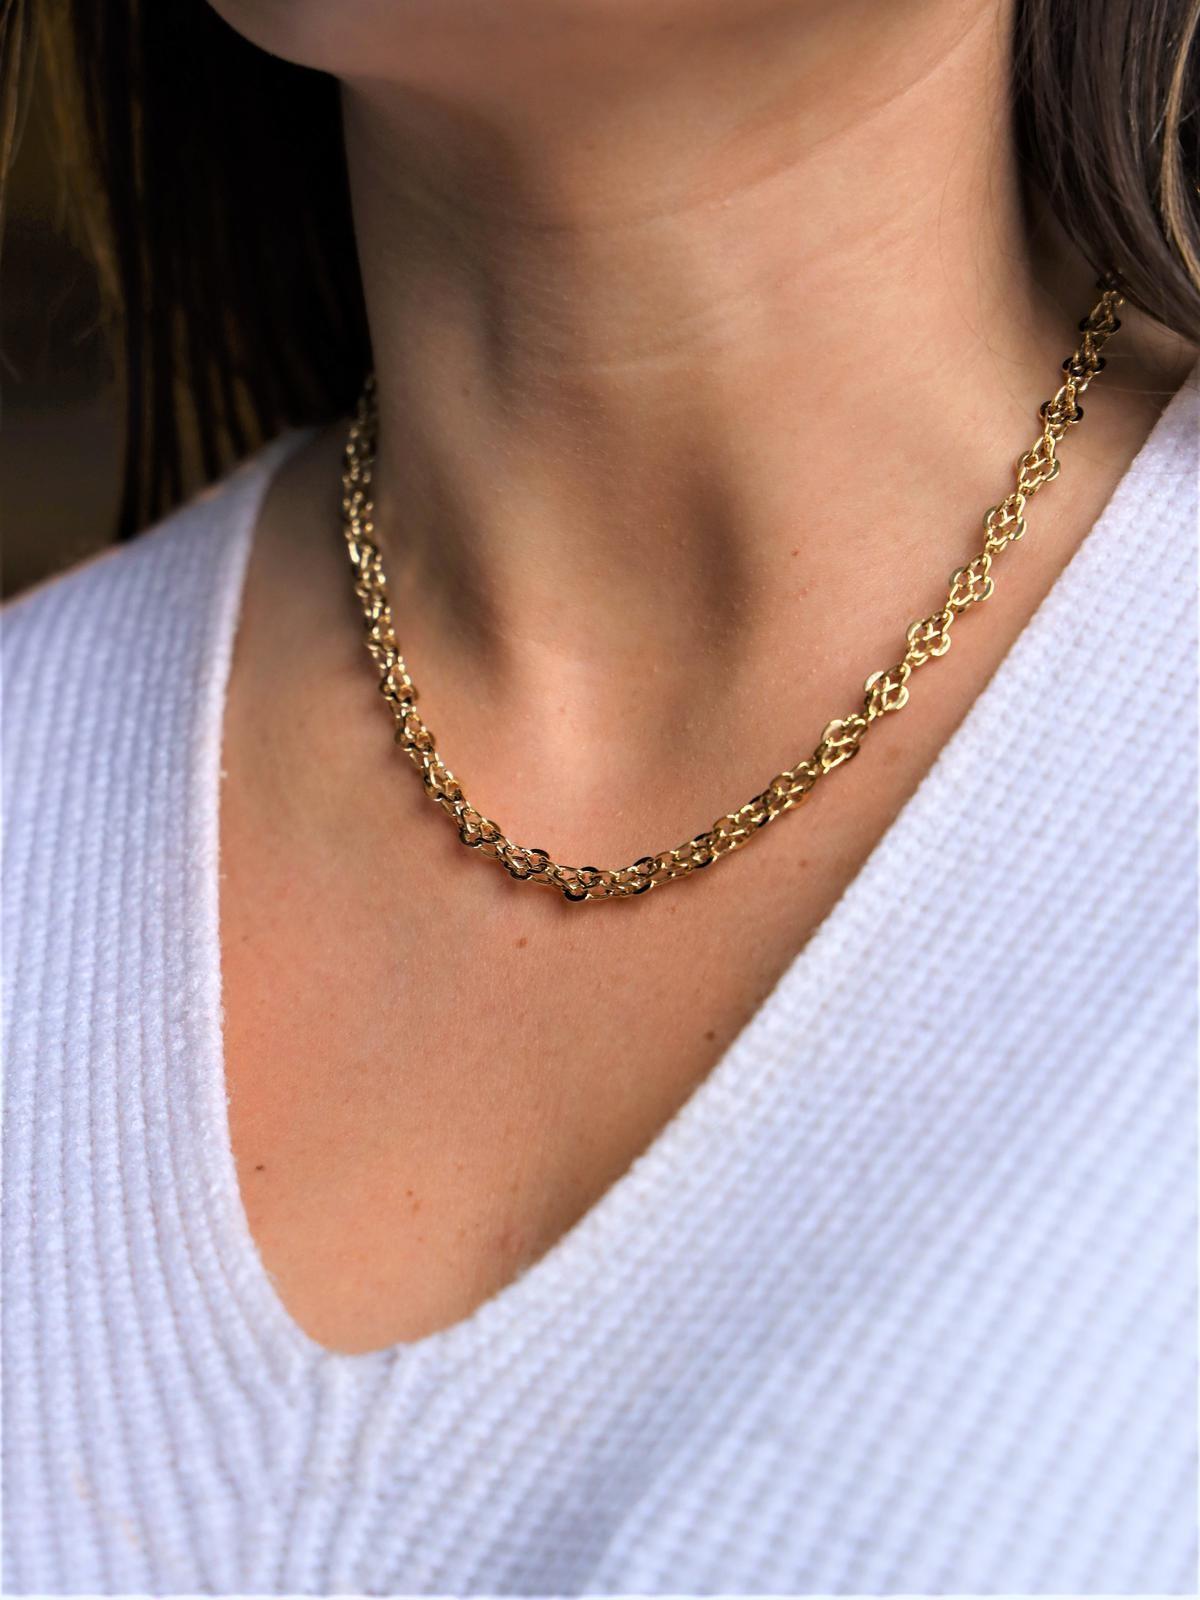 Yellow gold chain 750 thousandths (18 carats). soft mesh. length: 45.0 cm. width: 0.63 cm. total weight: 10.57 g. eagle head hallmark. excellent condition